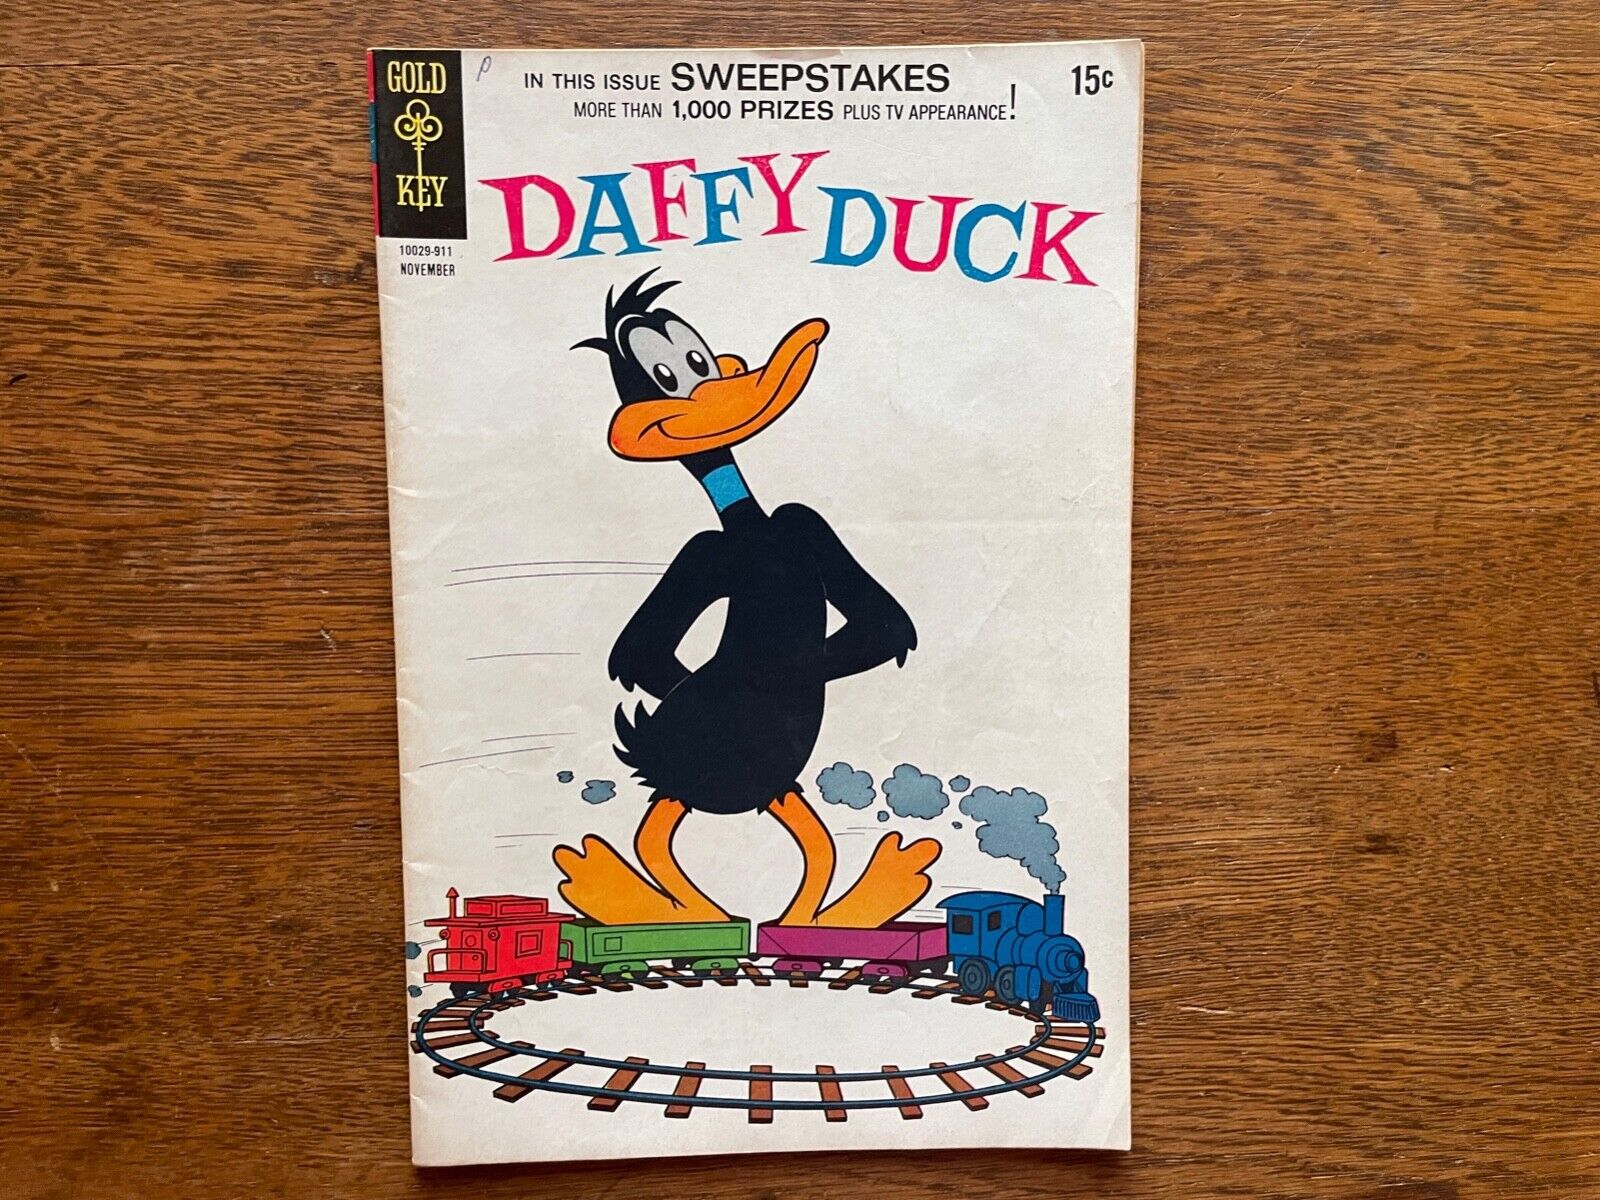 1969 GOLD KEY COMIC BOOK DAFFY DUCK 60 FINE CONDITION TV APPEARANCE SWEEPSTAKES